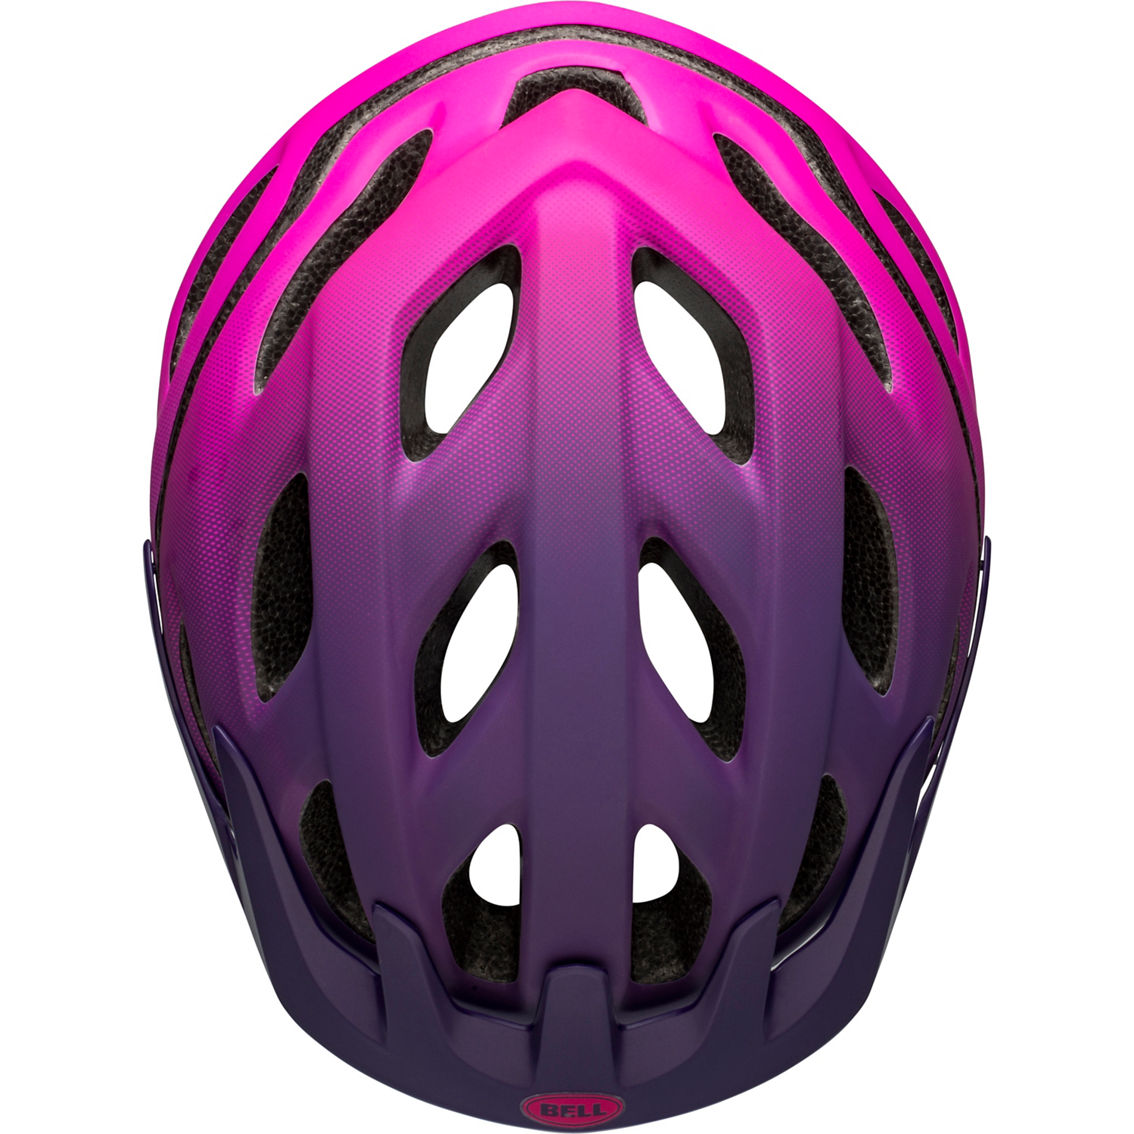 Bell Sports Girls Cadence Frenzy Youth Helmet - Image 3 of 3